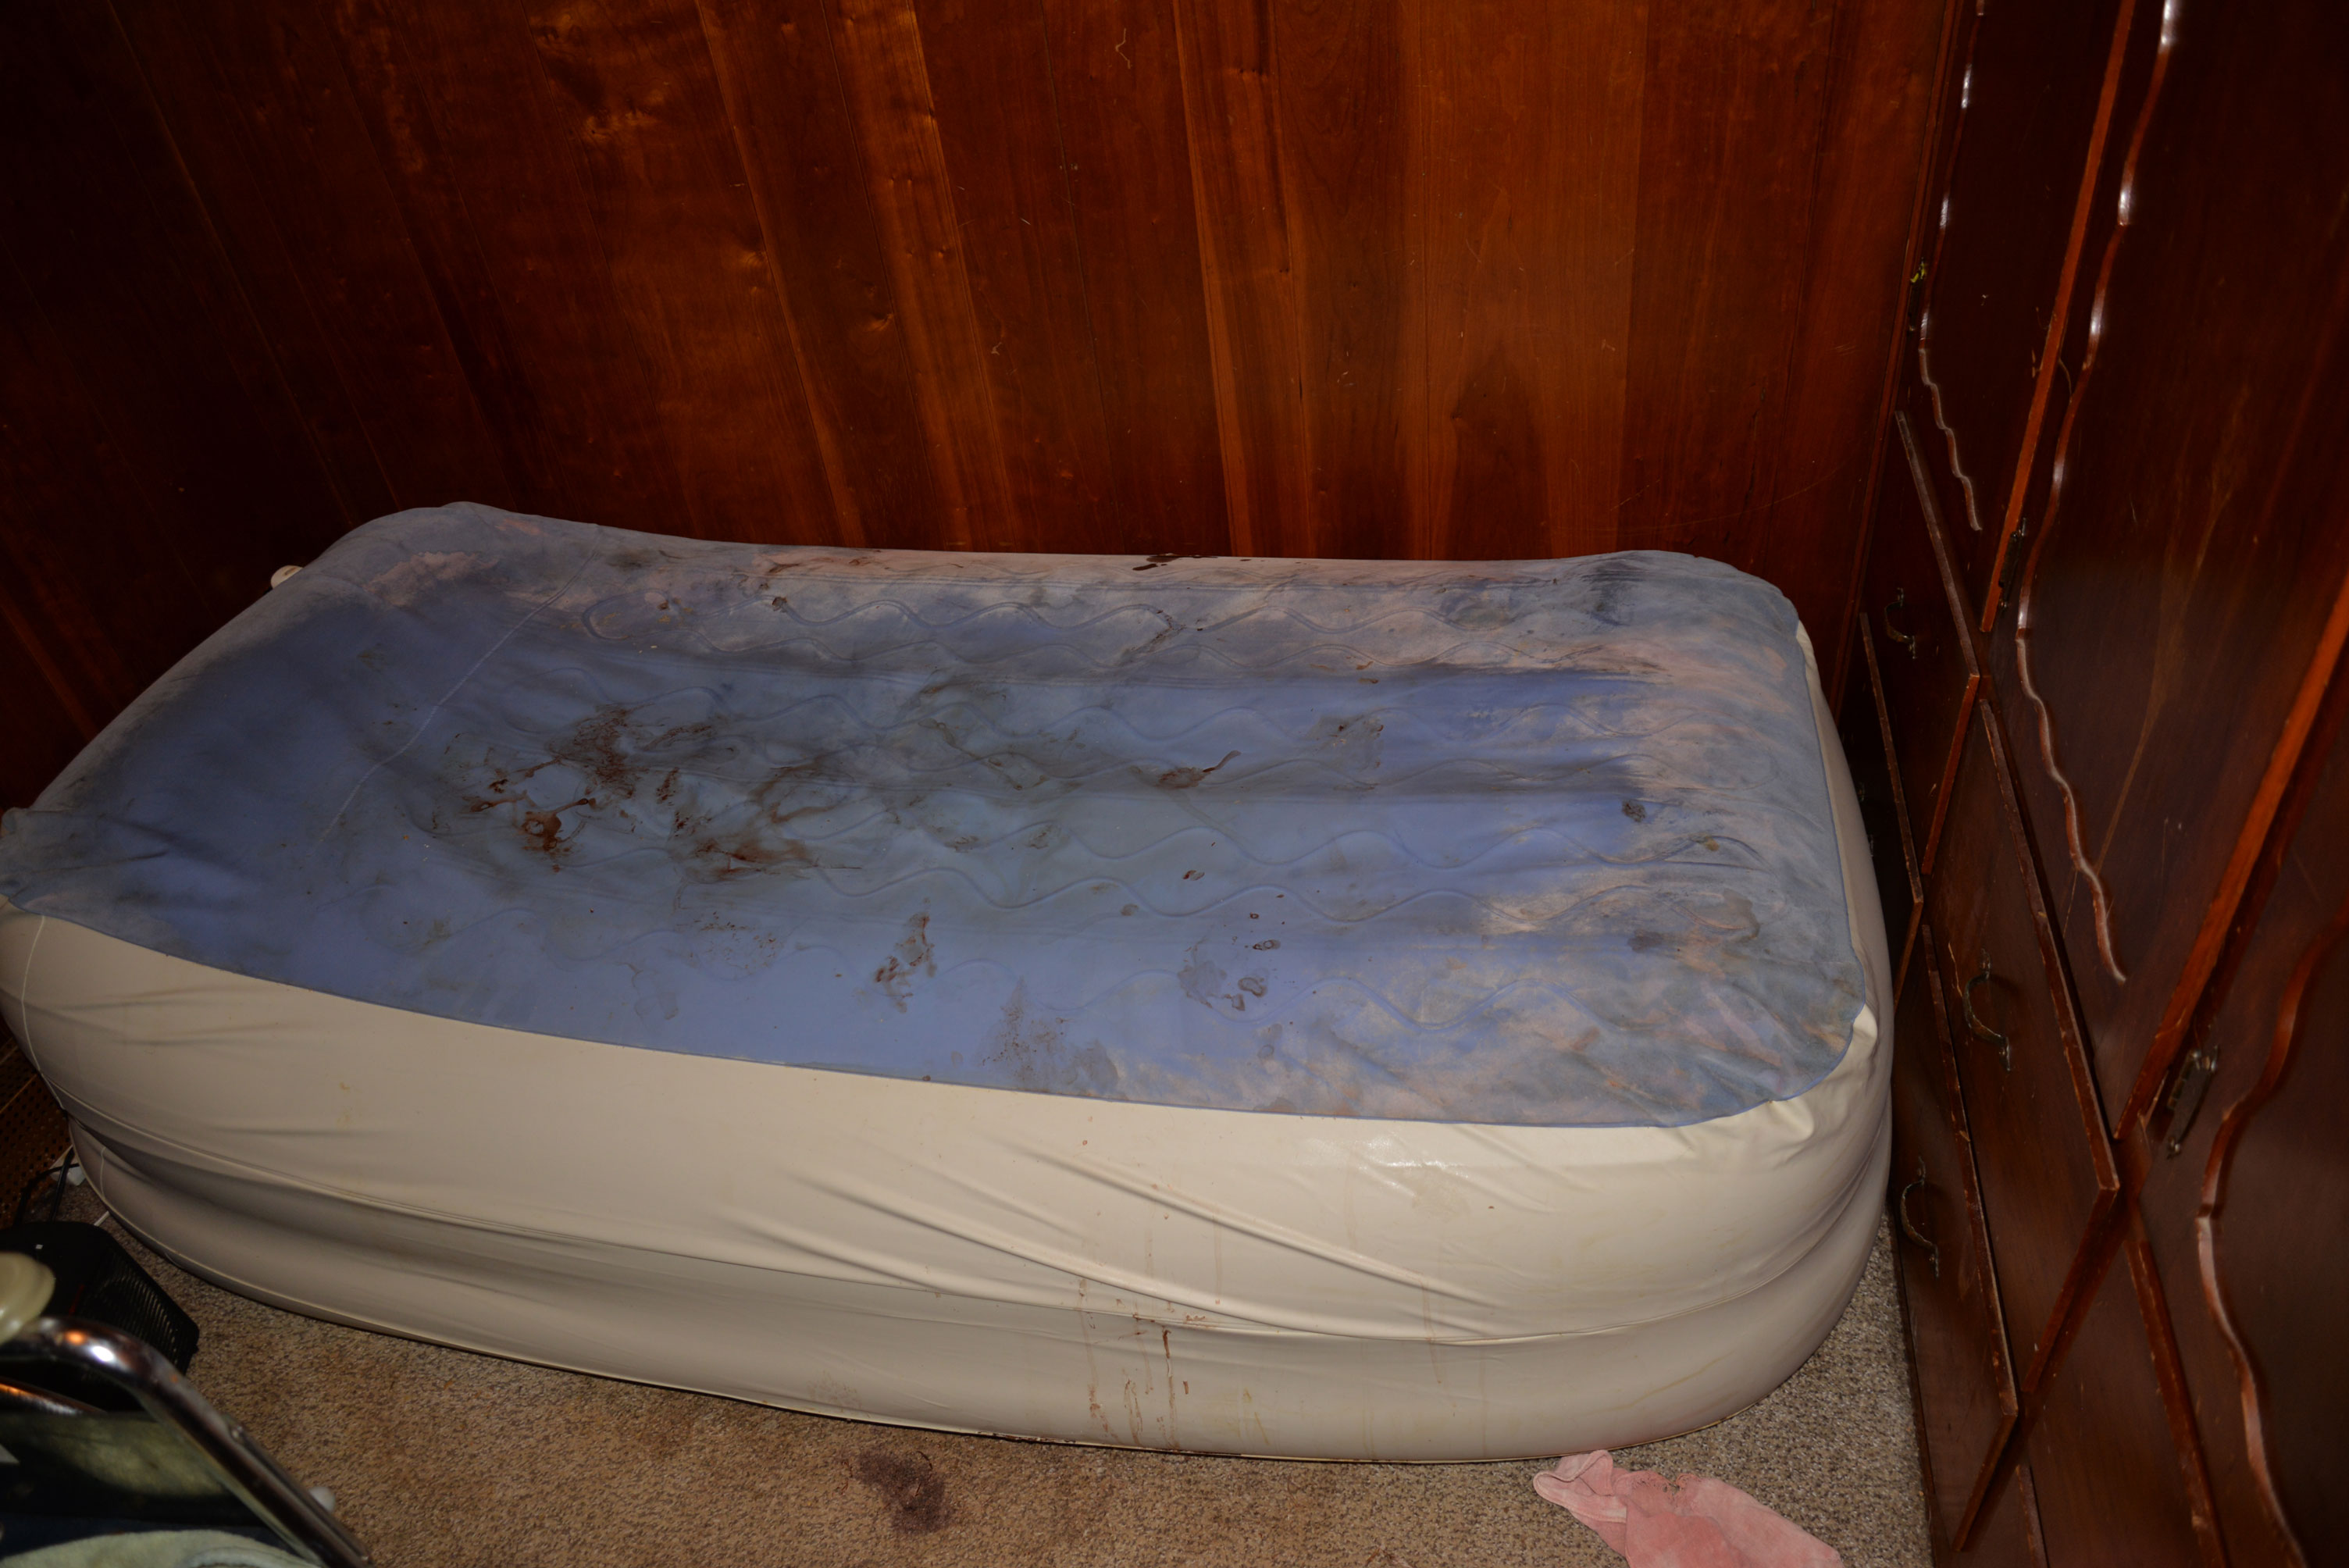 Aaron’s small mattress fills the width of a dark brown wood-paneled room. The mattress has no sheets, and its plastic cover has thick dust around the perimeter. Dried blood stains are smeared in the middle of the mattress. The mattress lays directly atop the stained, neutral-toned carpet. 